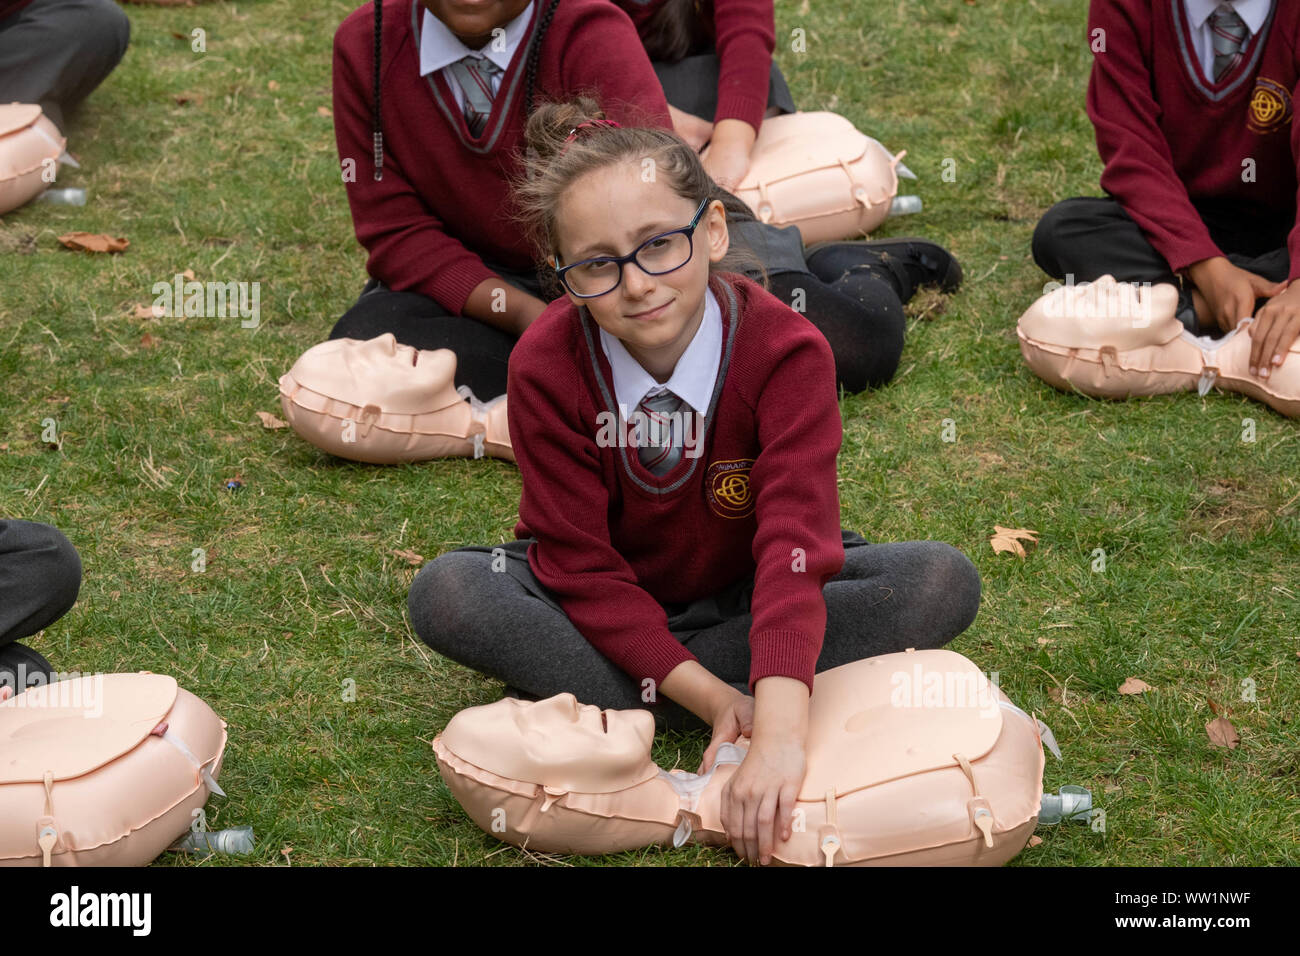 London UK, 12th September 2019 The British Red Cross hosts a demonstration of 100 school children conducting first aid outside the Houses of Parliament to mark the achievement of getting first aid on the school curriculum school girl in uniform works on a resuscitation  doll  Credit Ian DavidsonAlamy Live News Stock Photo